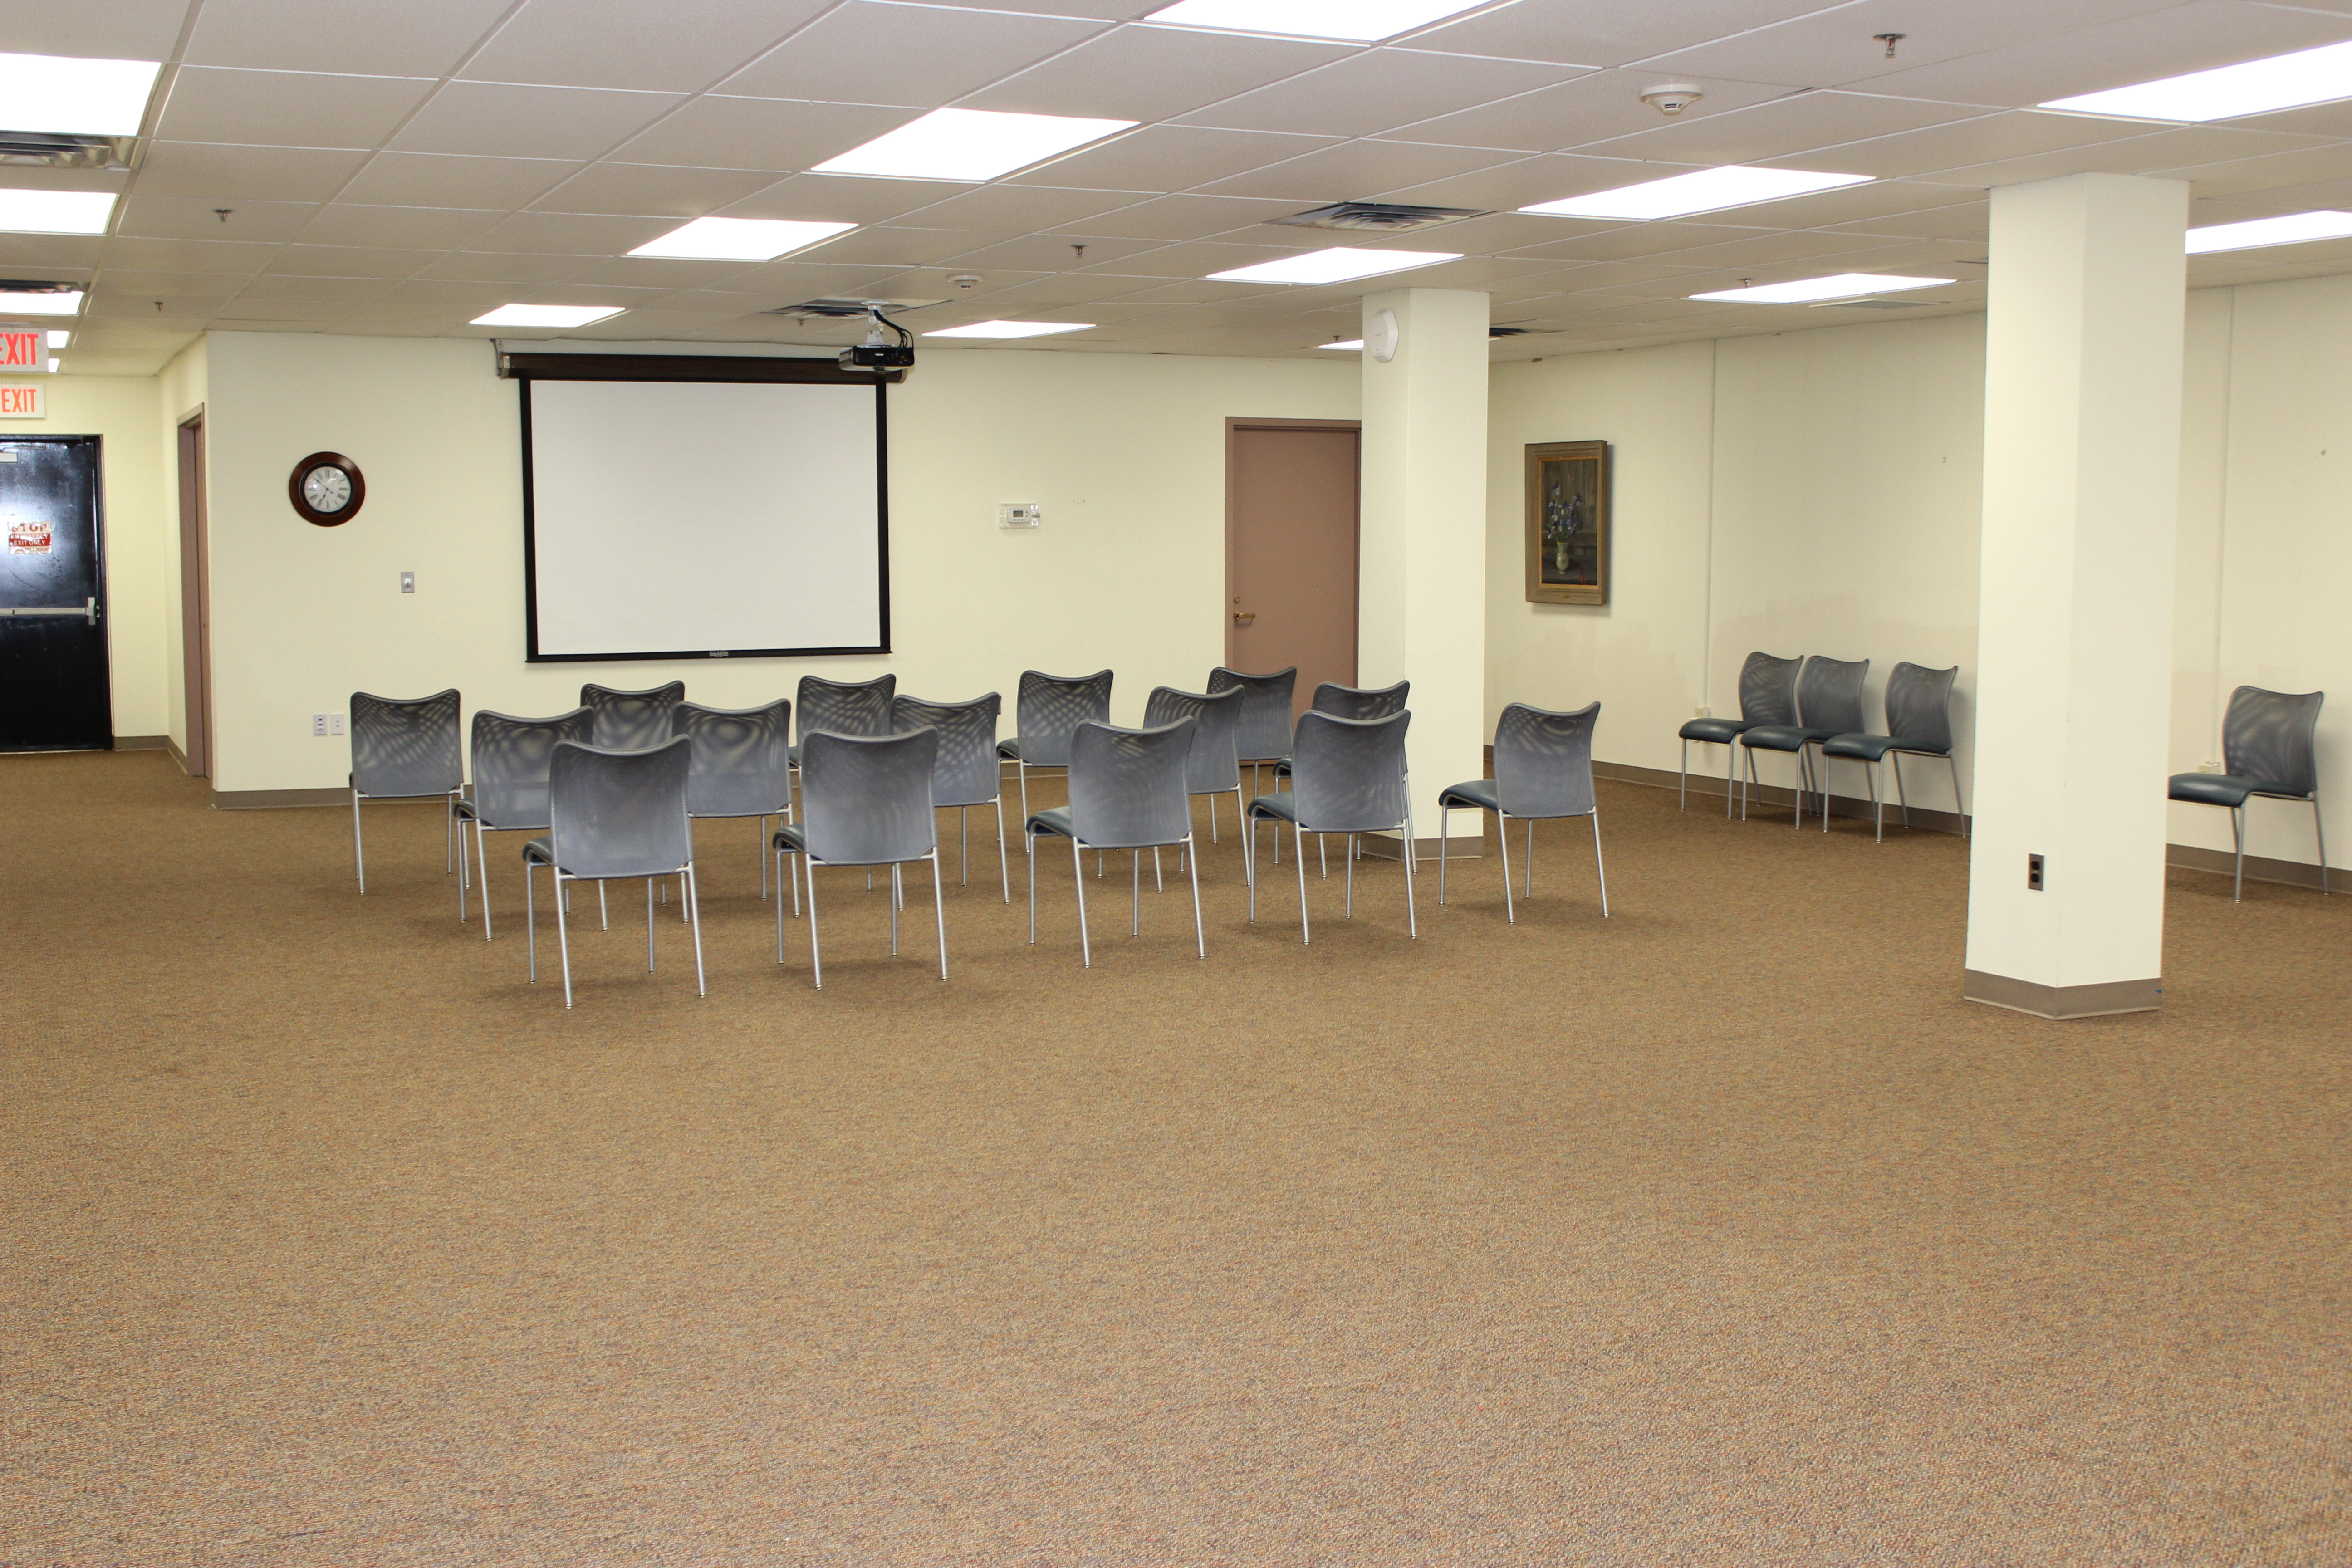 Meeting room with chairs. Projector screen on wall.